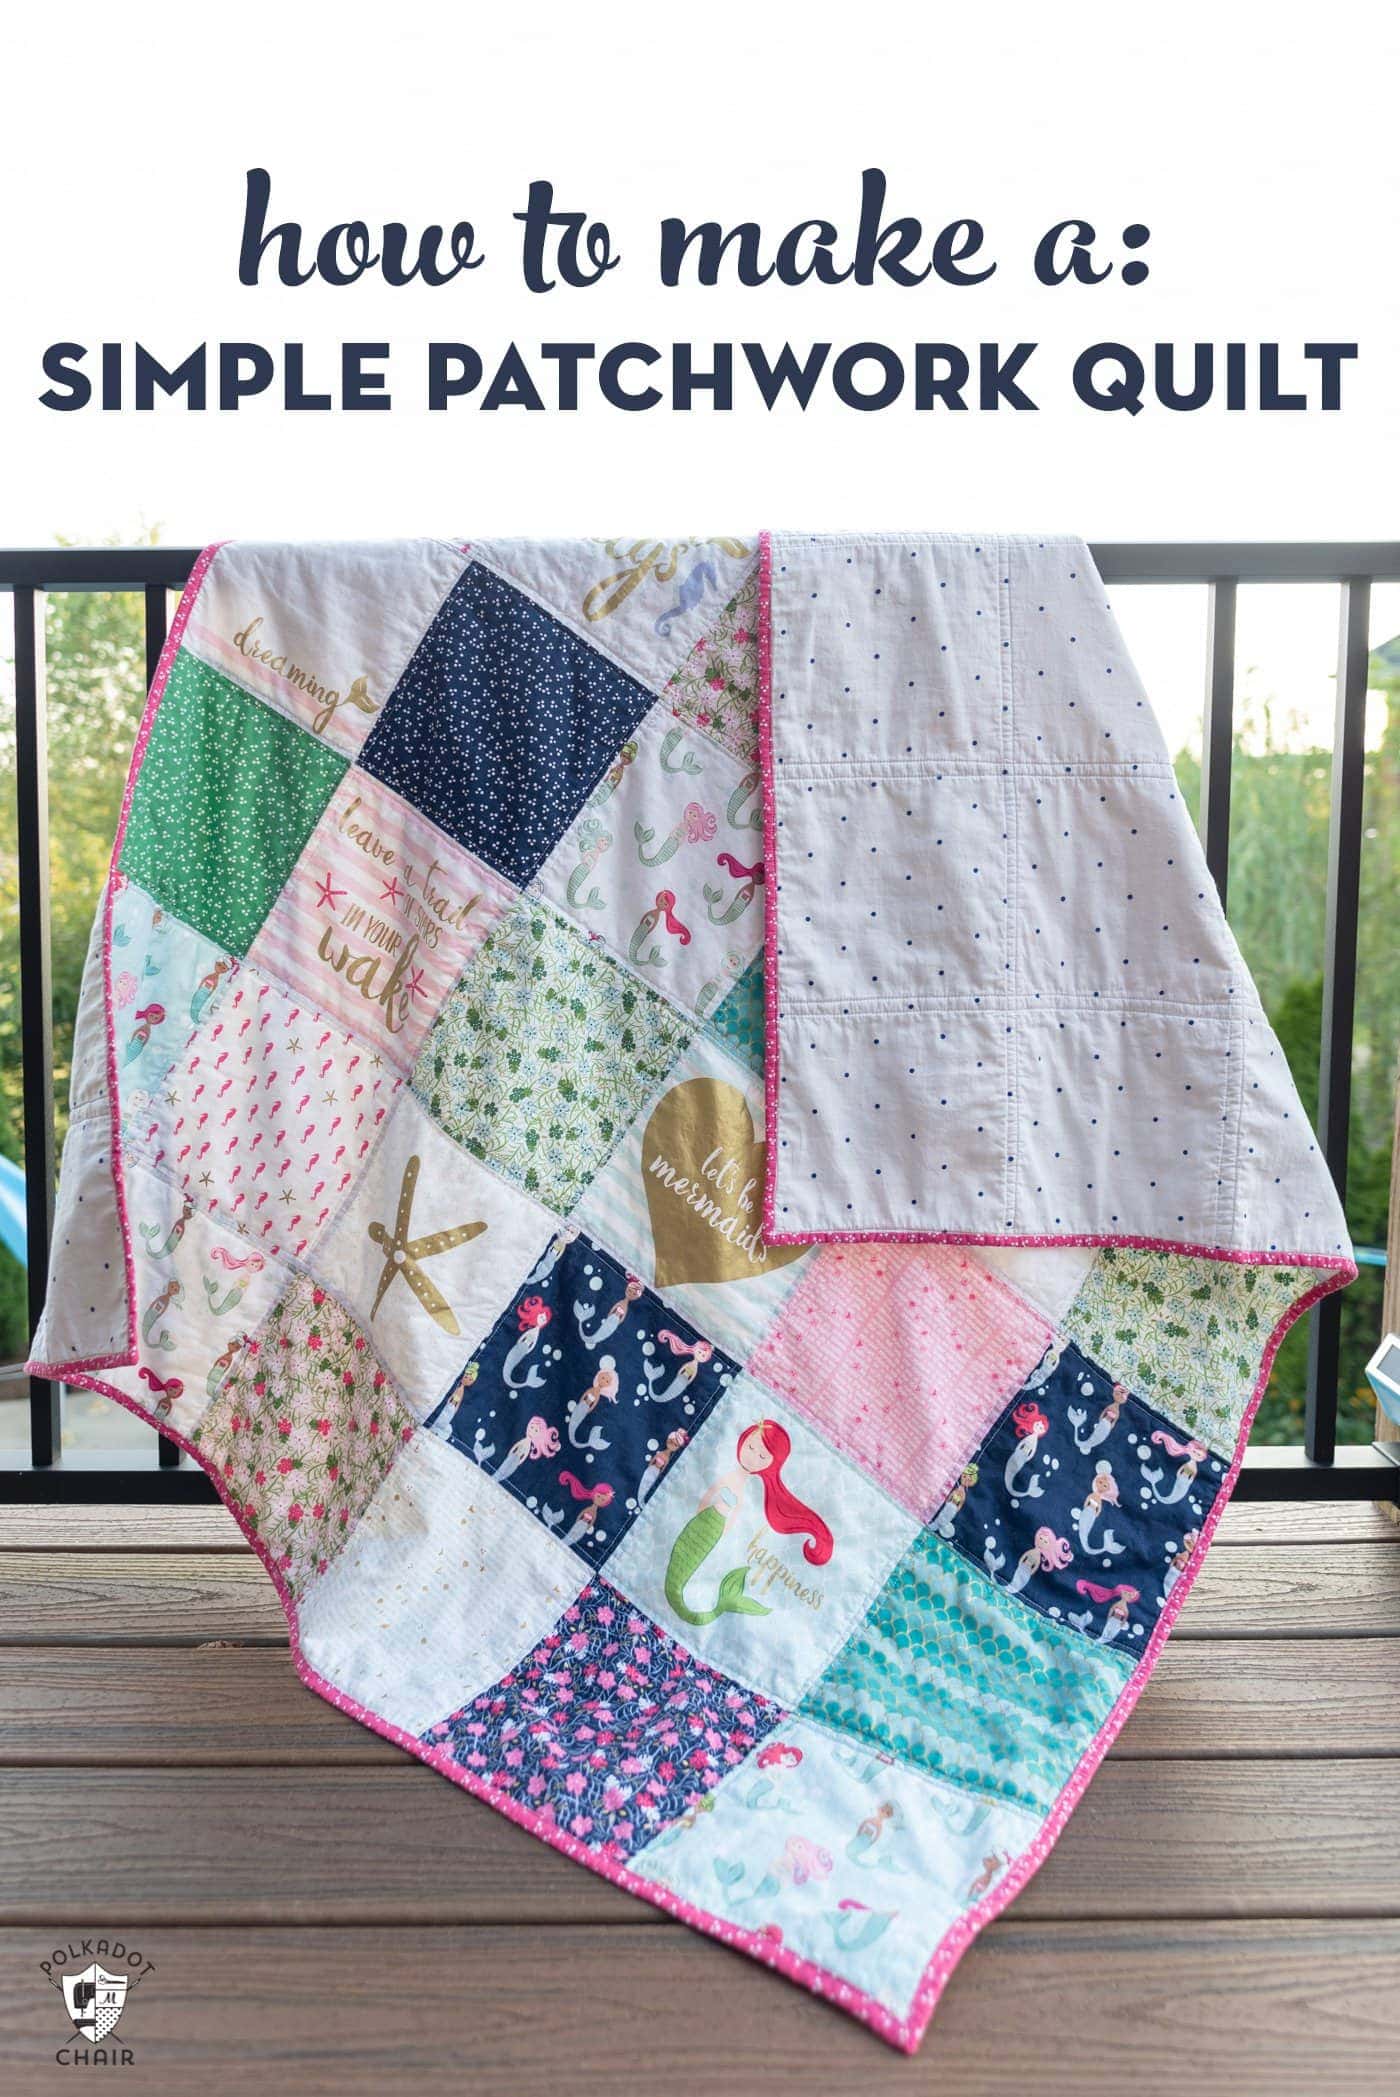 Creating Your Own Quilt Block